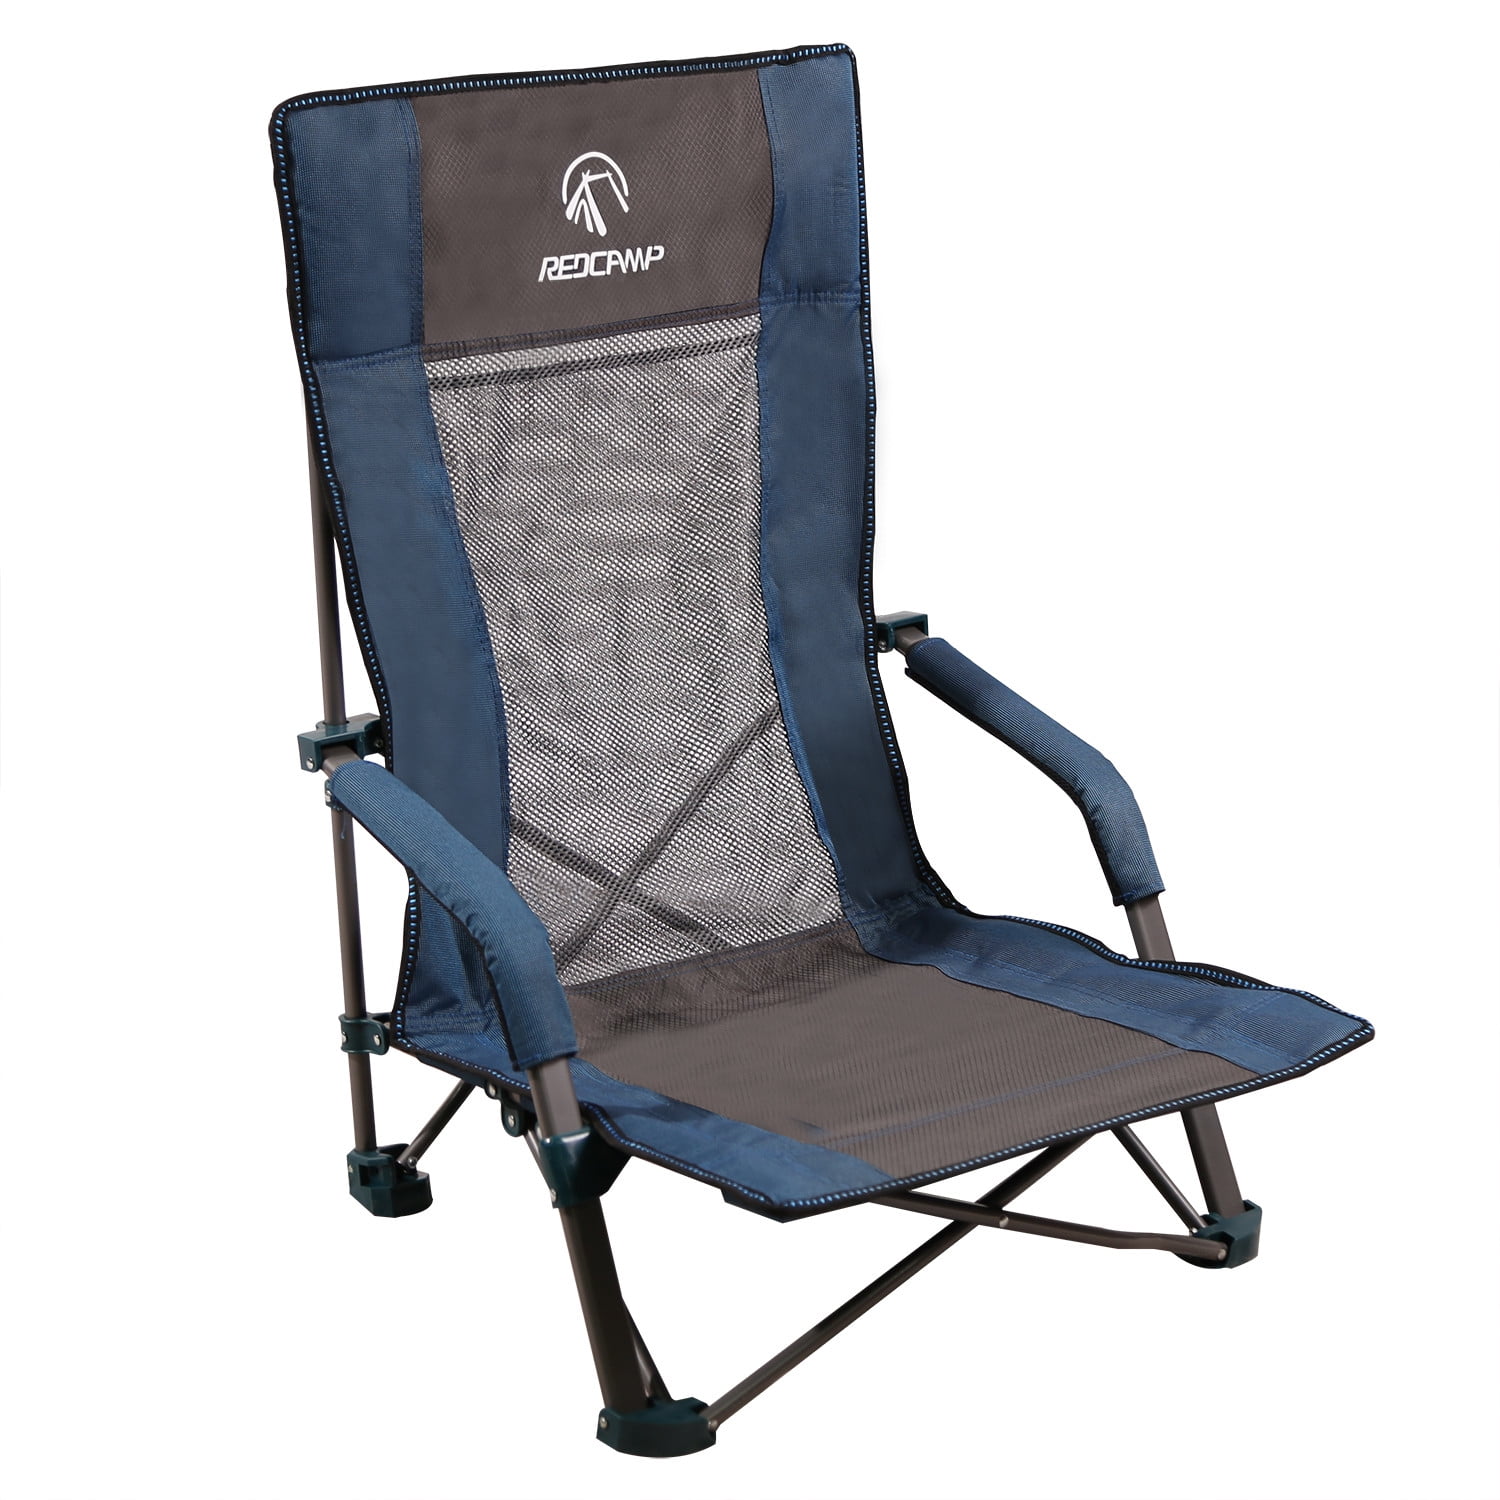 REDCAMP Low Beach Chair Folding Lightweight with High Back, Portable Outdoor Concert Chair for 